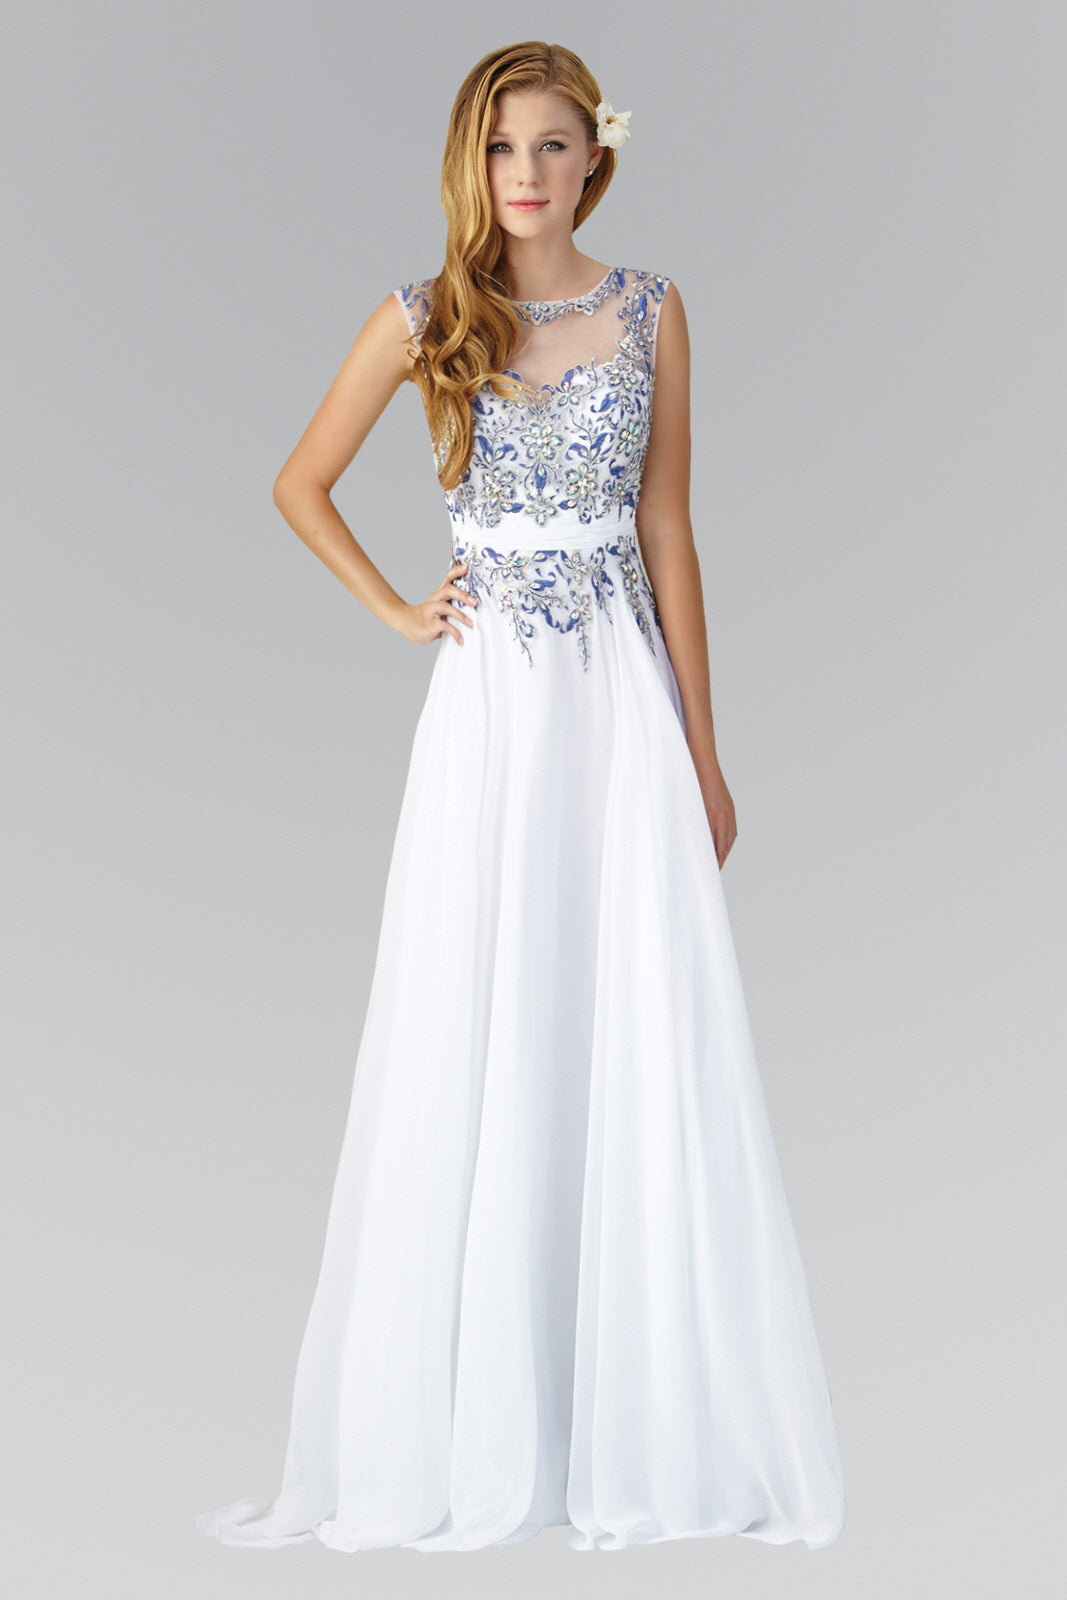 Sleeveless Long Dress with Lace and Jewel Embellished Bodice GLGL2056 Elsy Style PROM